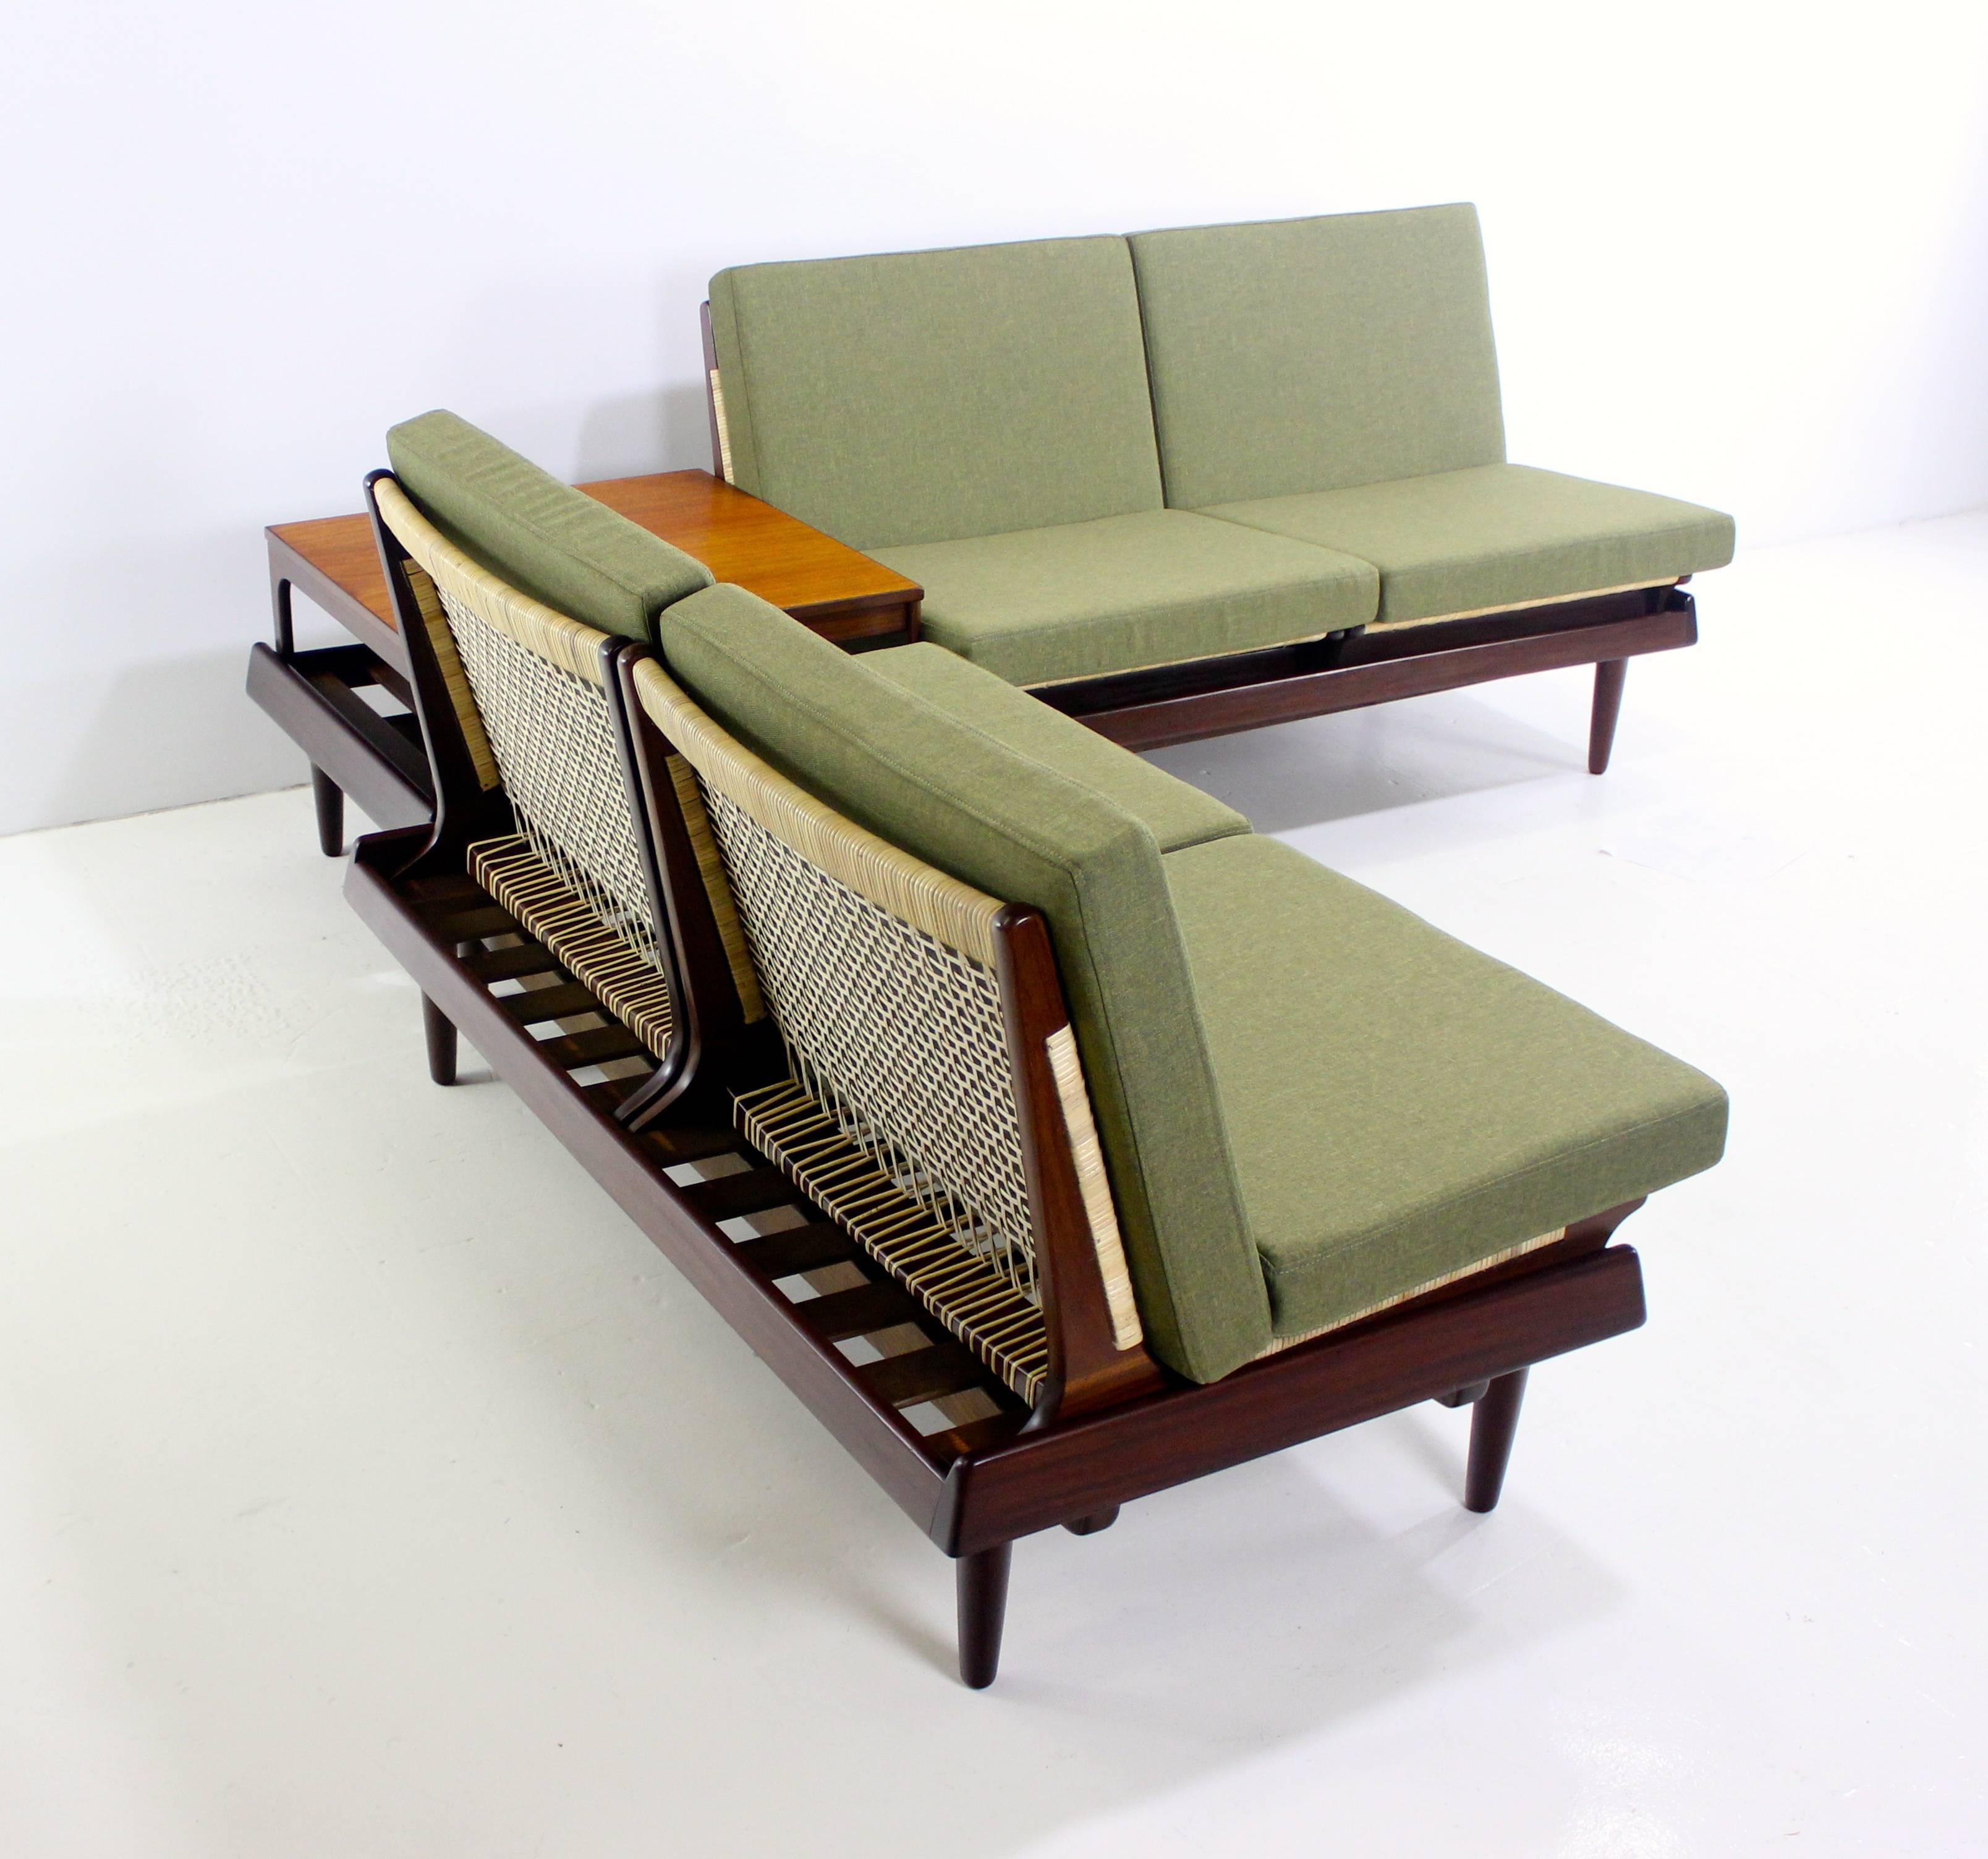 Danish modular seven-piece seating group designed by Hans Olsen.
Bramin, maker.
Composed of one sofa and one settee unified by integrated corner table.
Breaks down to two benches, four chairs and one low table.
Eight interchangeable cushions